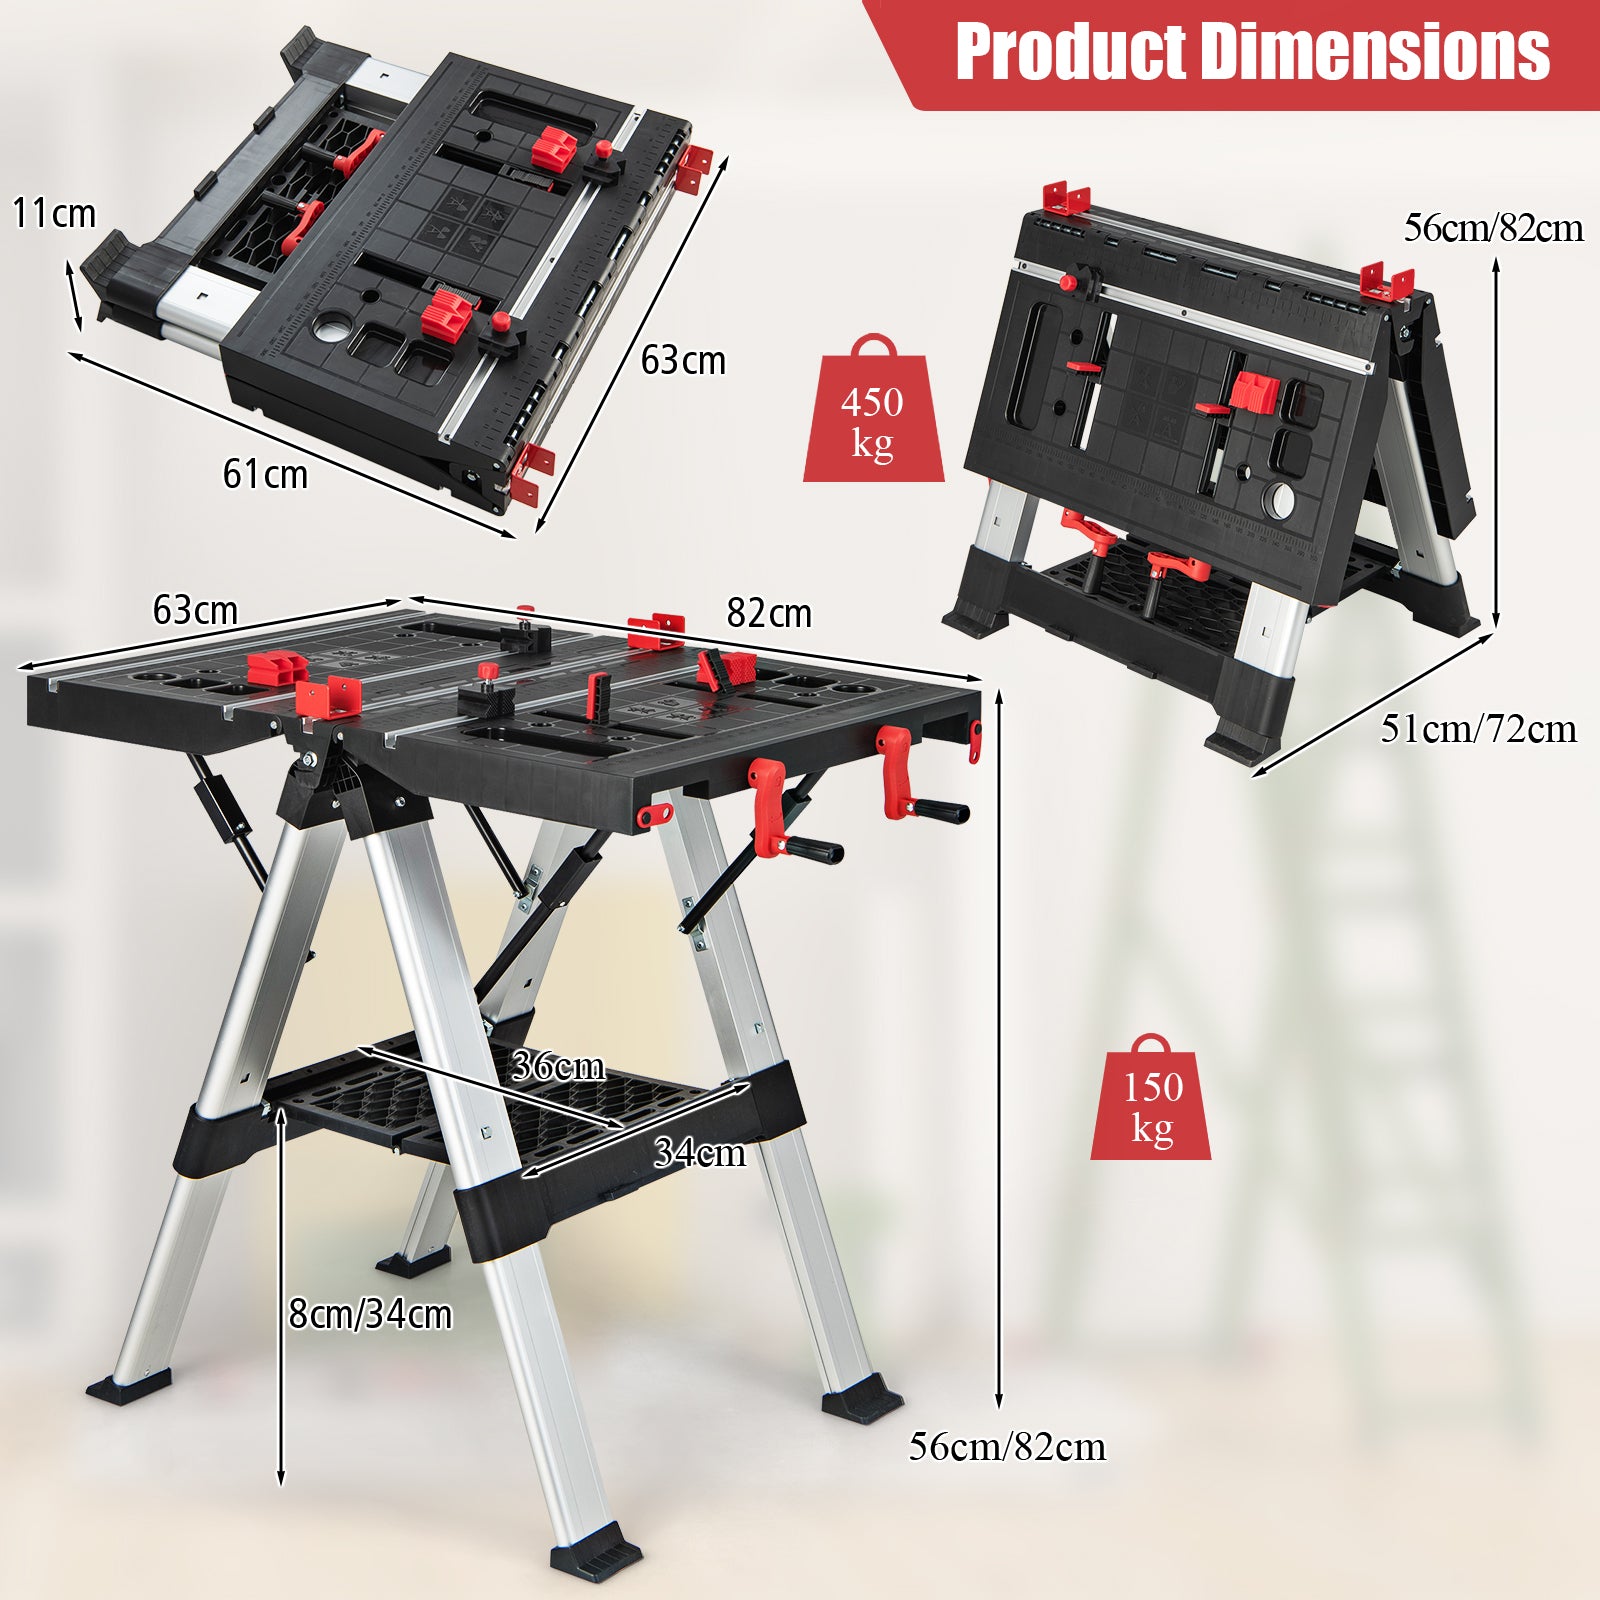 2 in 1 Portable Folding Work Bench Sawhorse Worktable with Adjustable Height-Red